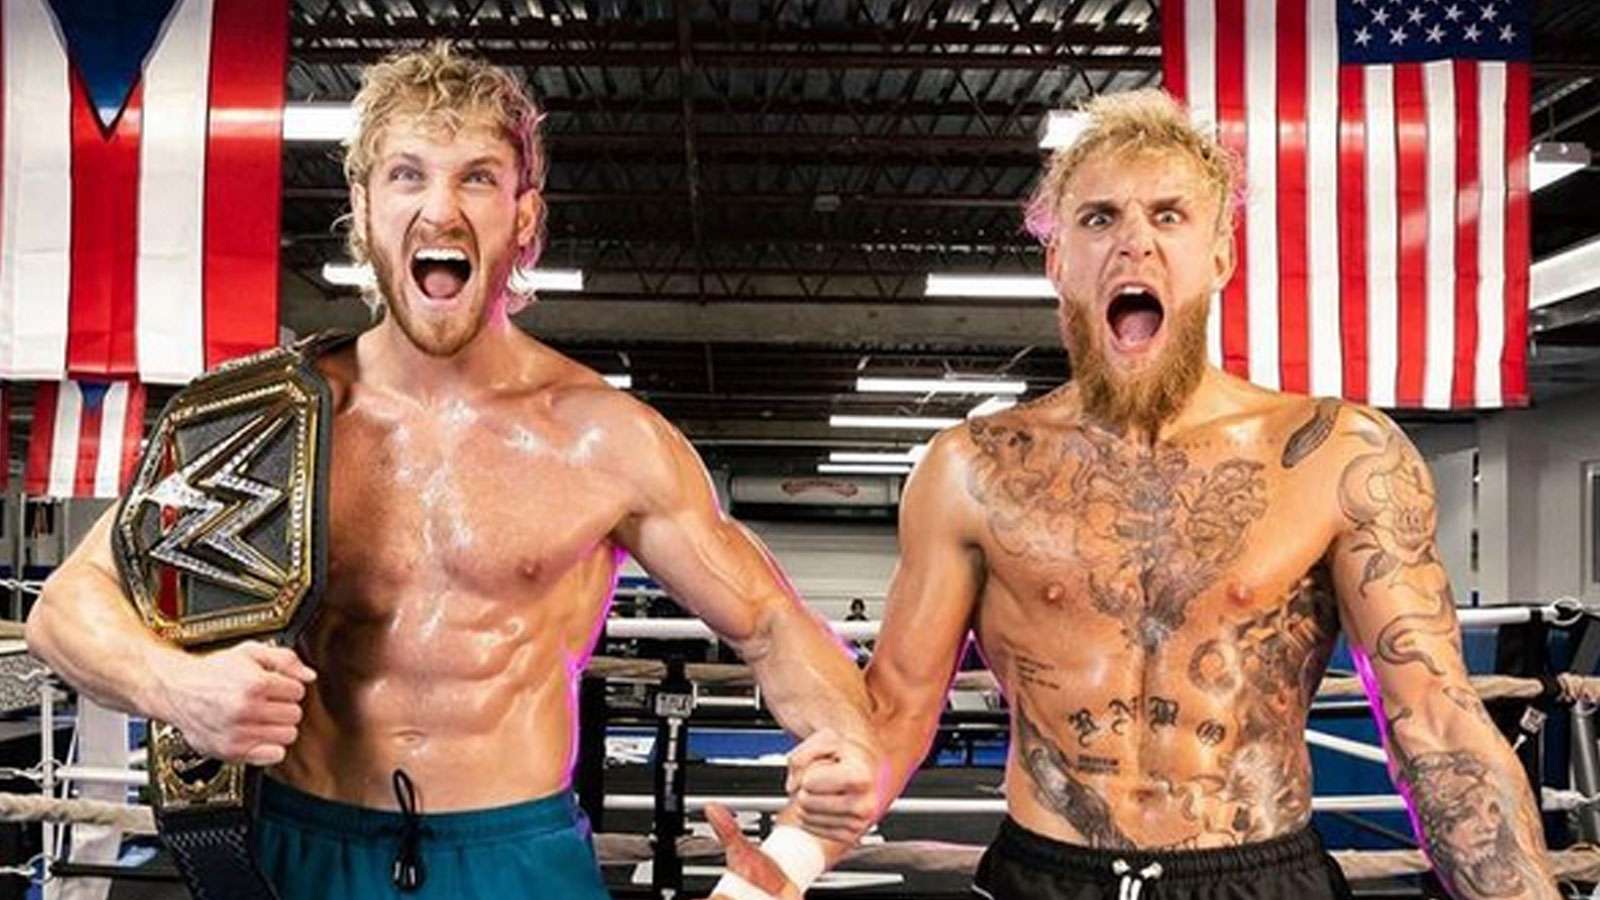 Logan Paul and Jake Paul with their shirts off stood in the boxing ring